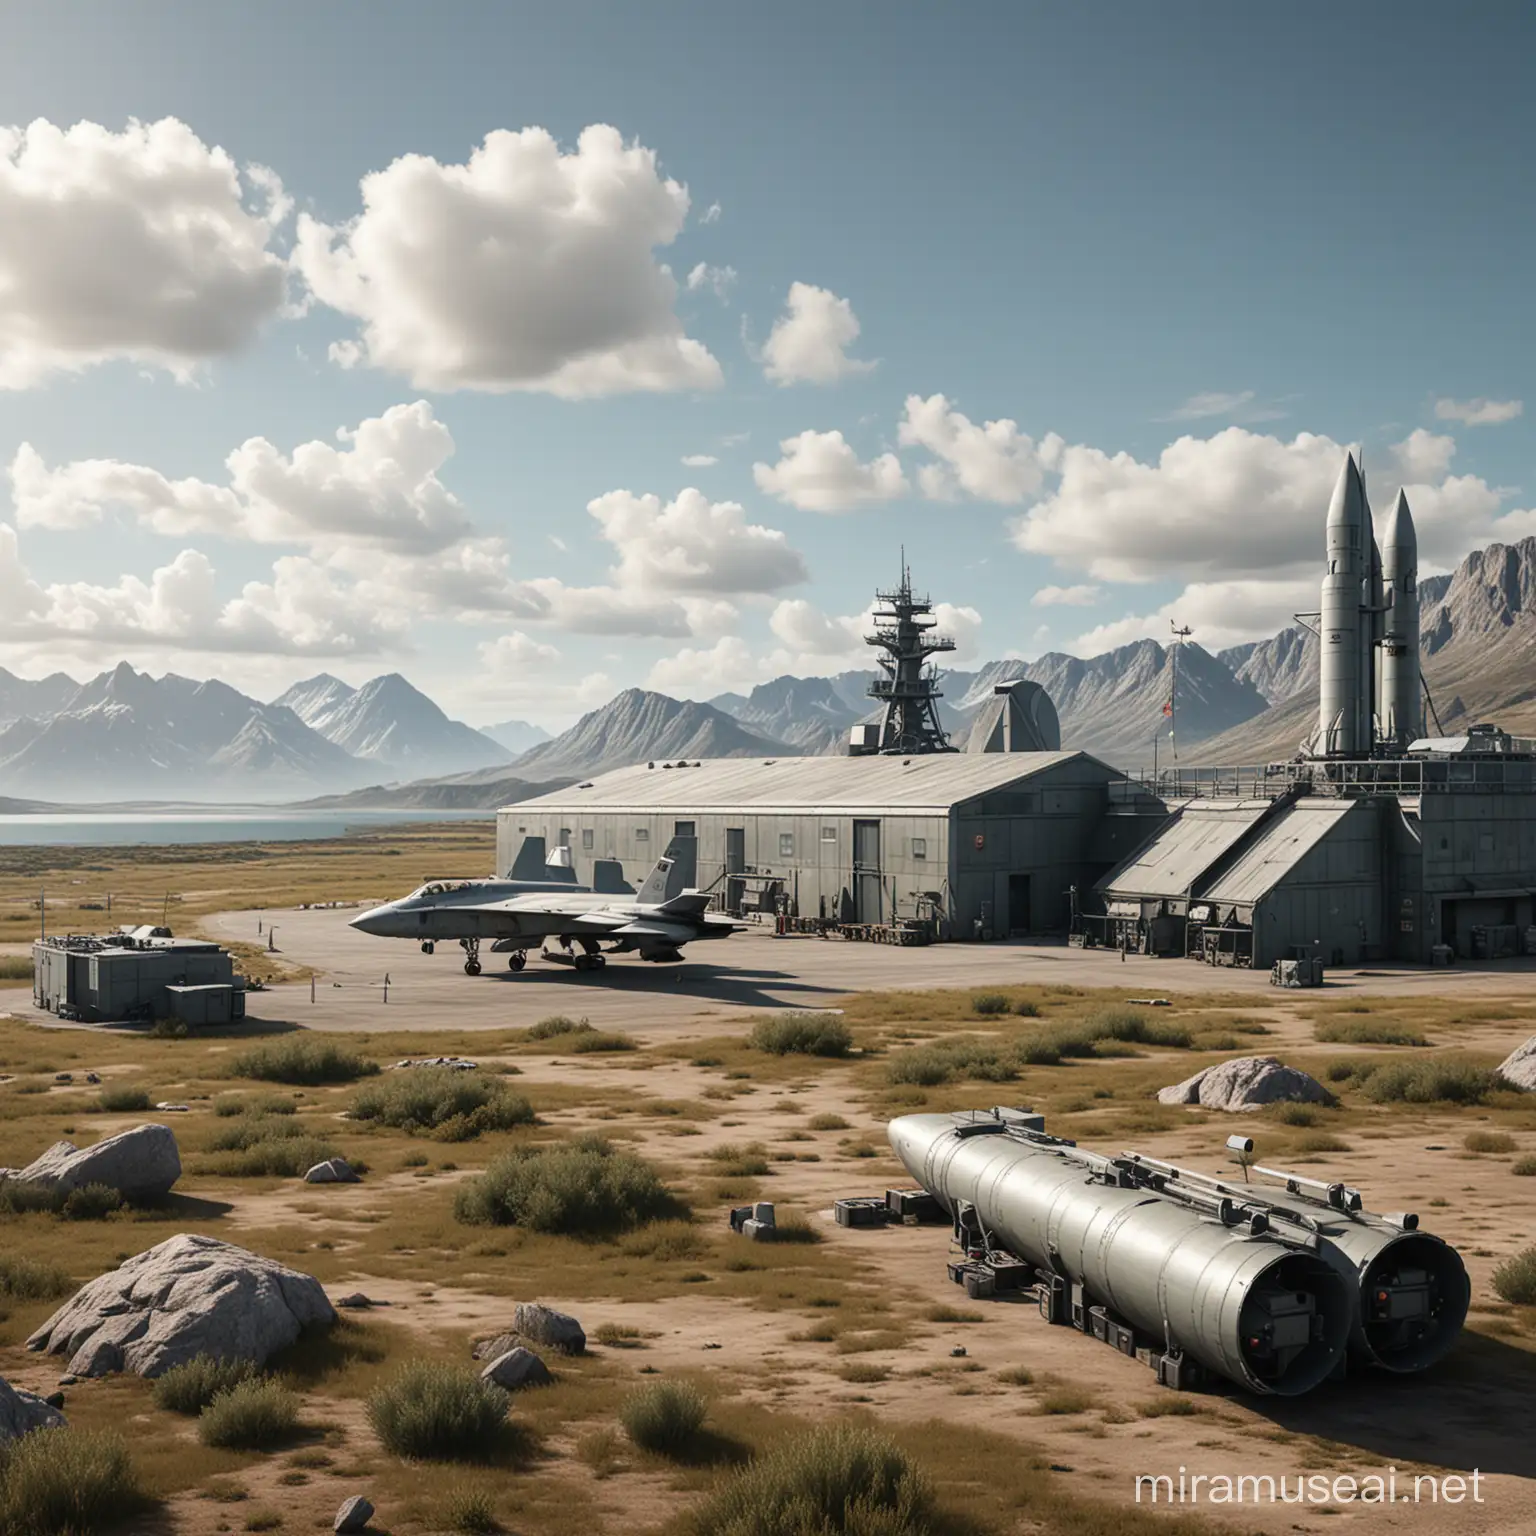 cruise missile military station in a remote location, realistic details, HD